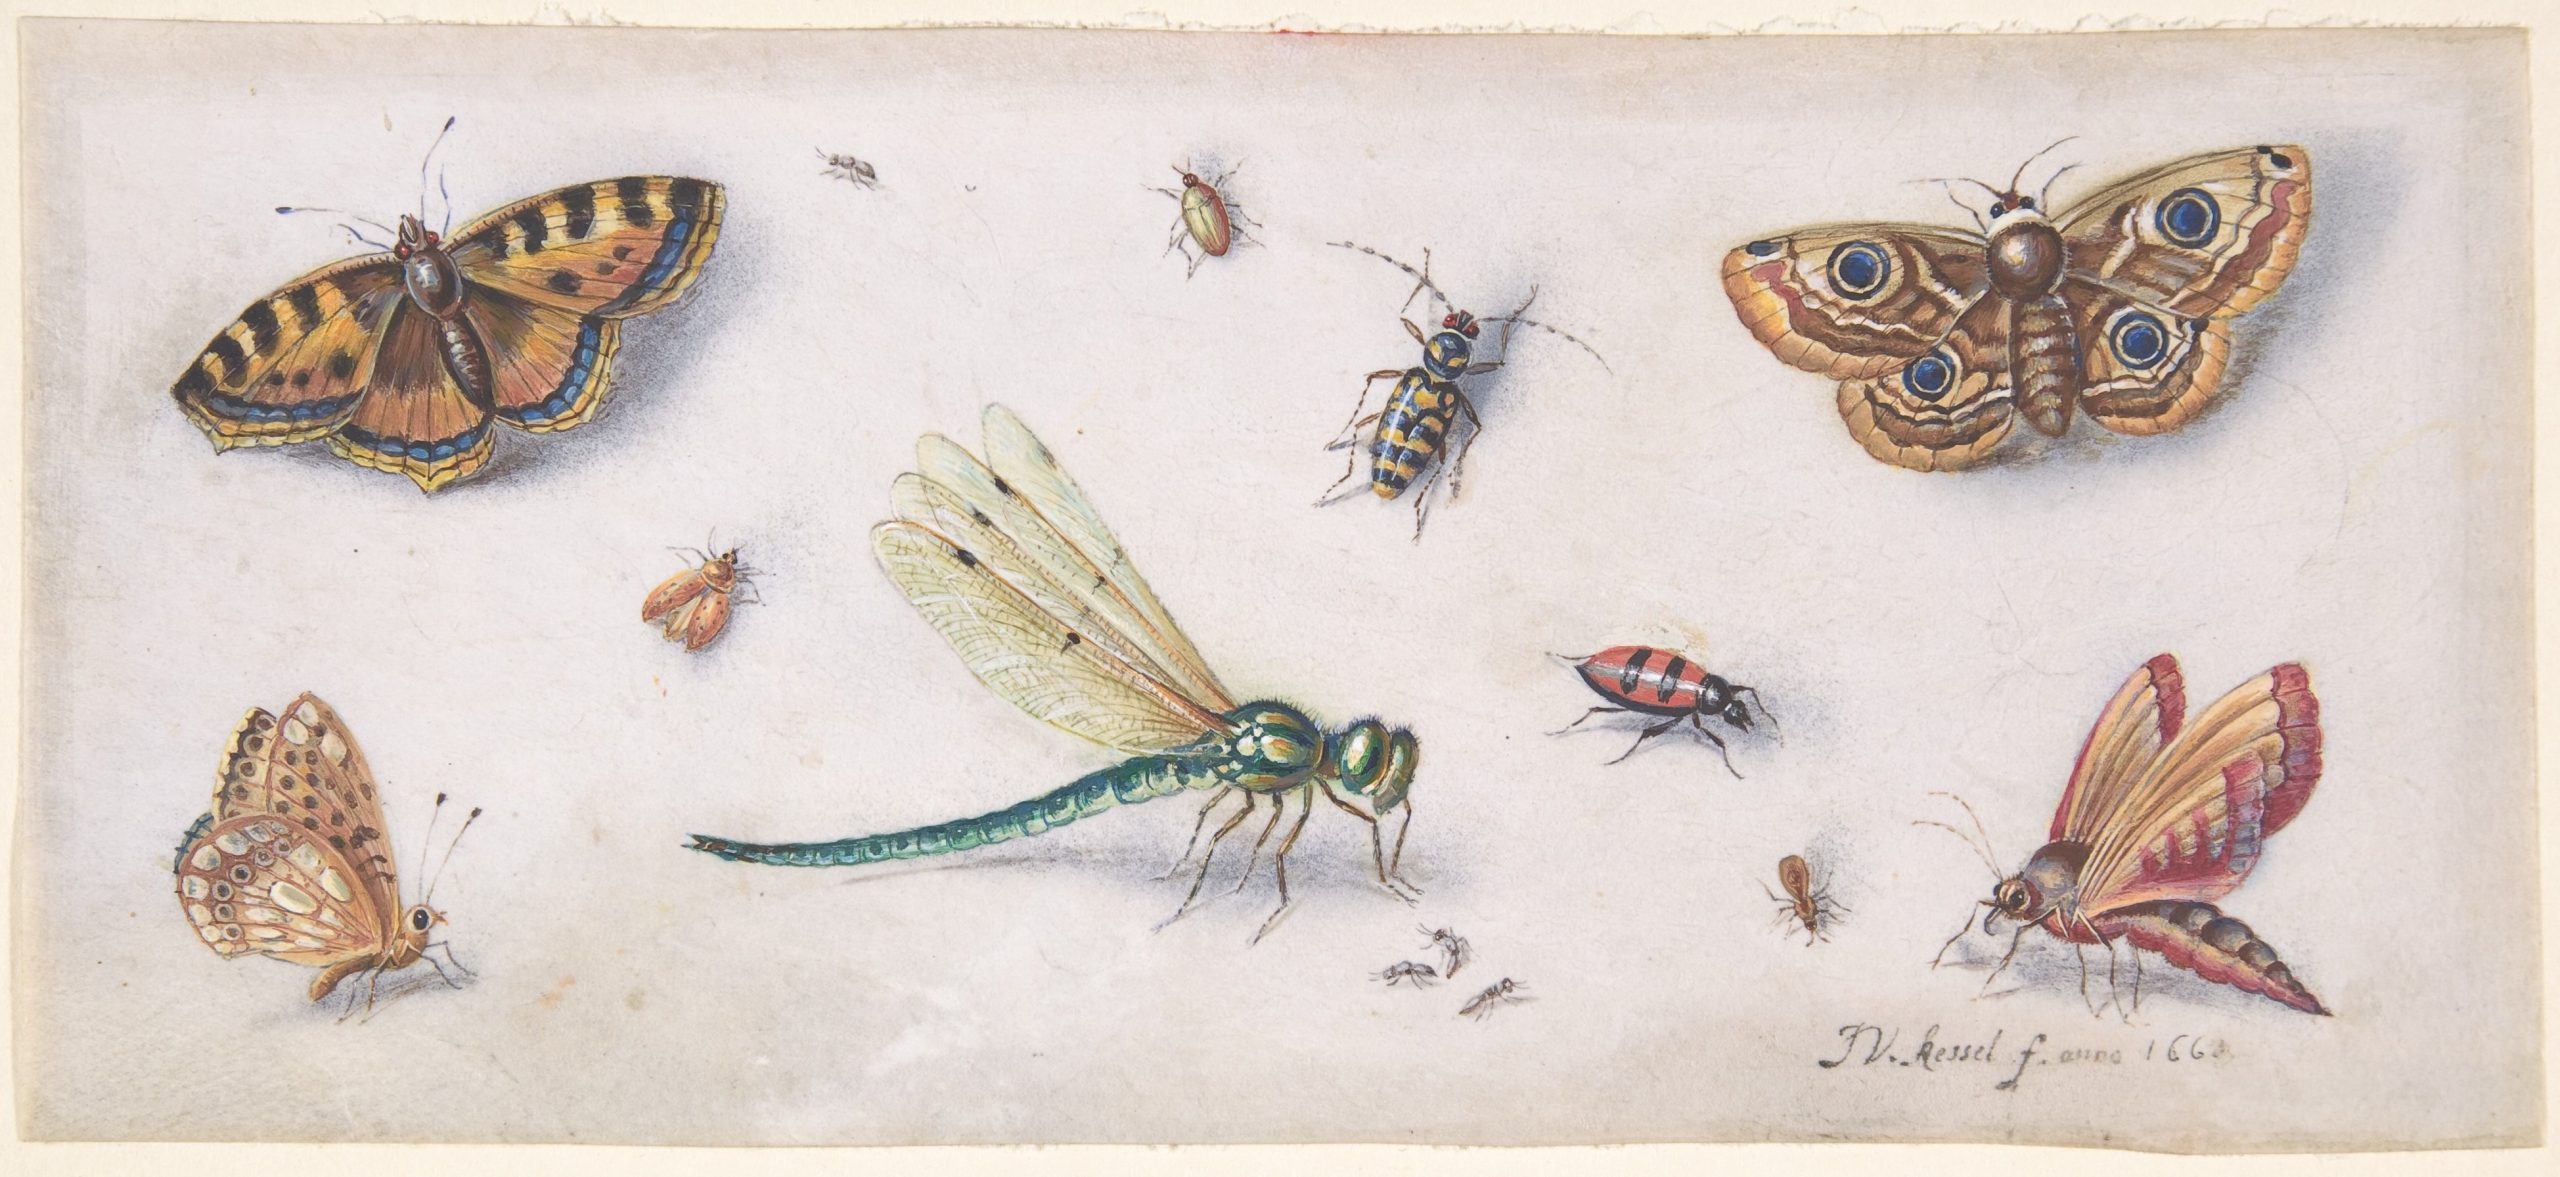 An illustration of a collection of insects and butterflies.